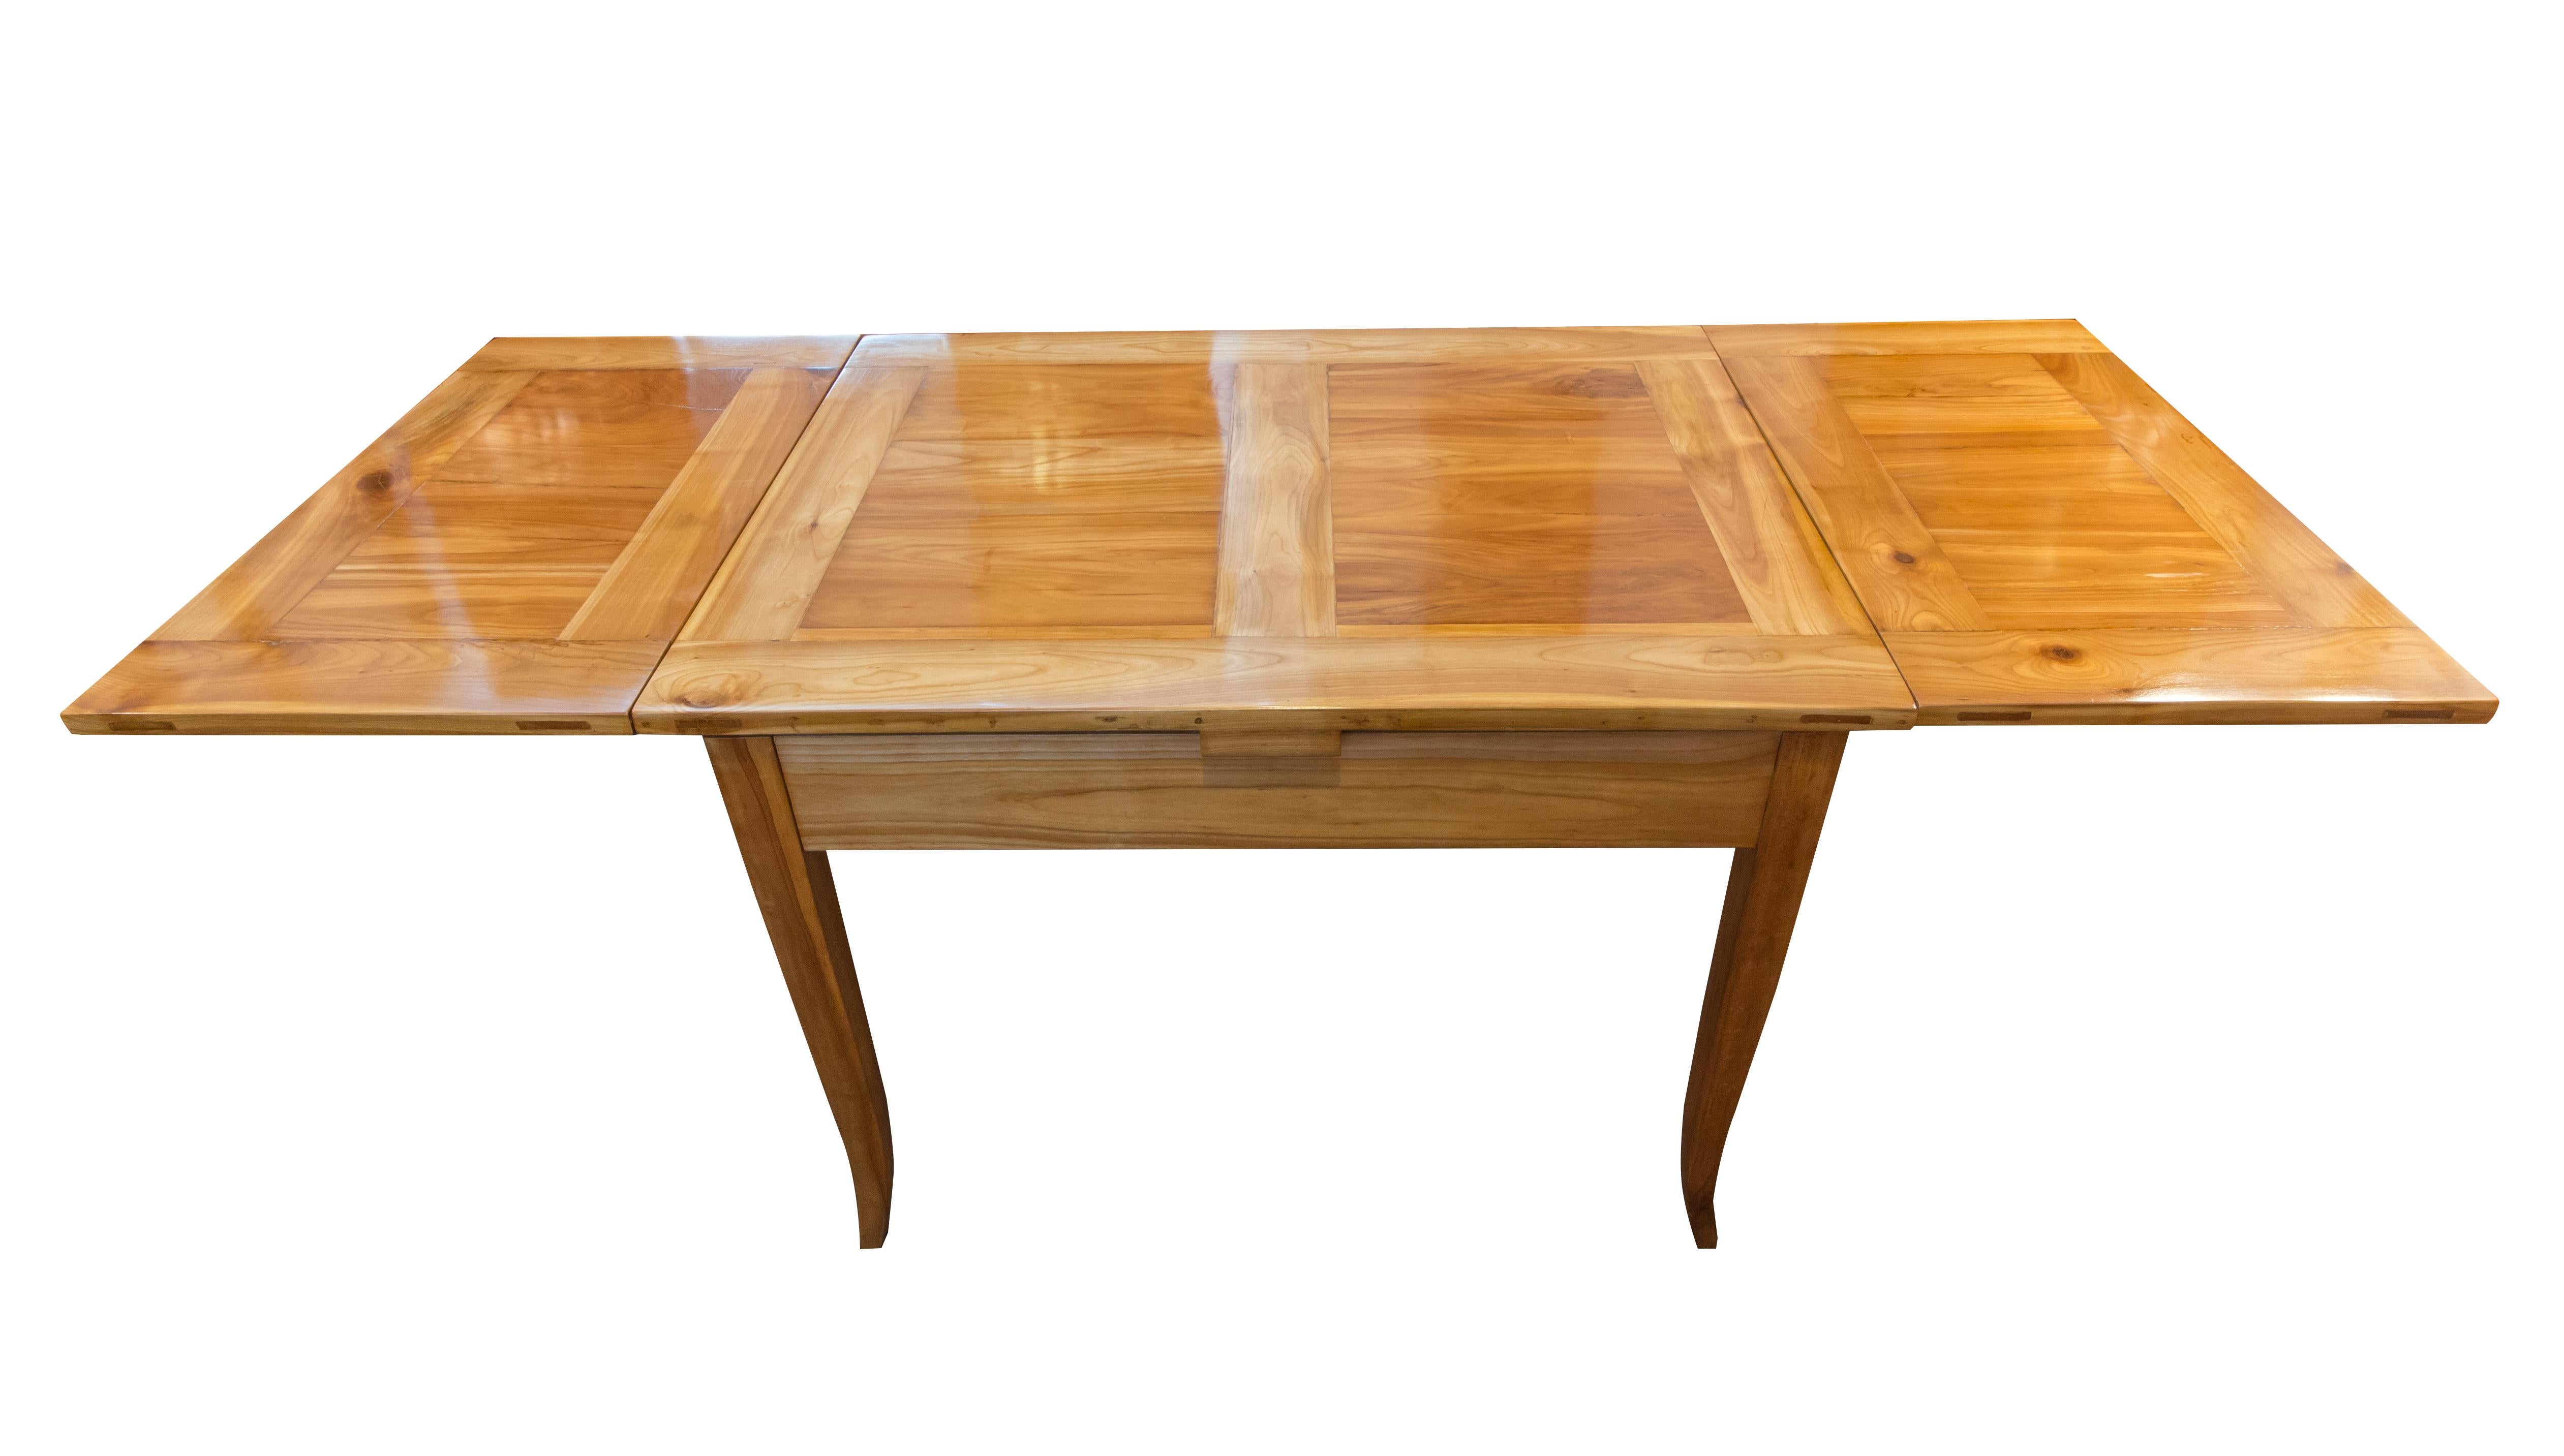 Beautiful dinner table from the time of Biedermeier. The table is made of solid cherrywood and has one-drawer. The table is in a very good condition.
Measure: The space up to the frame is 57.5 cm high. The table can be extended at both side 44.5